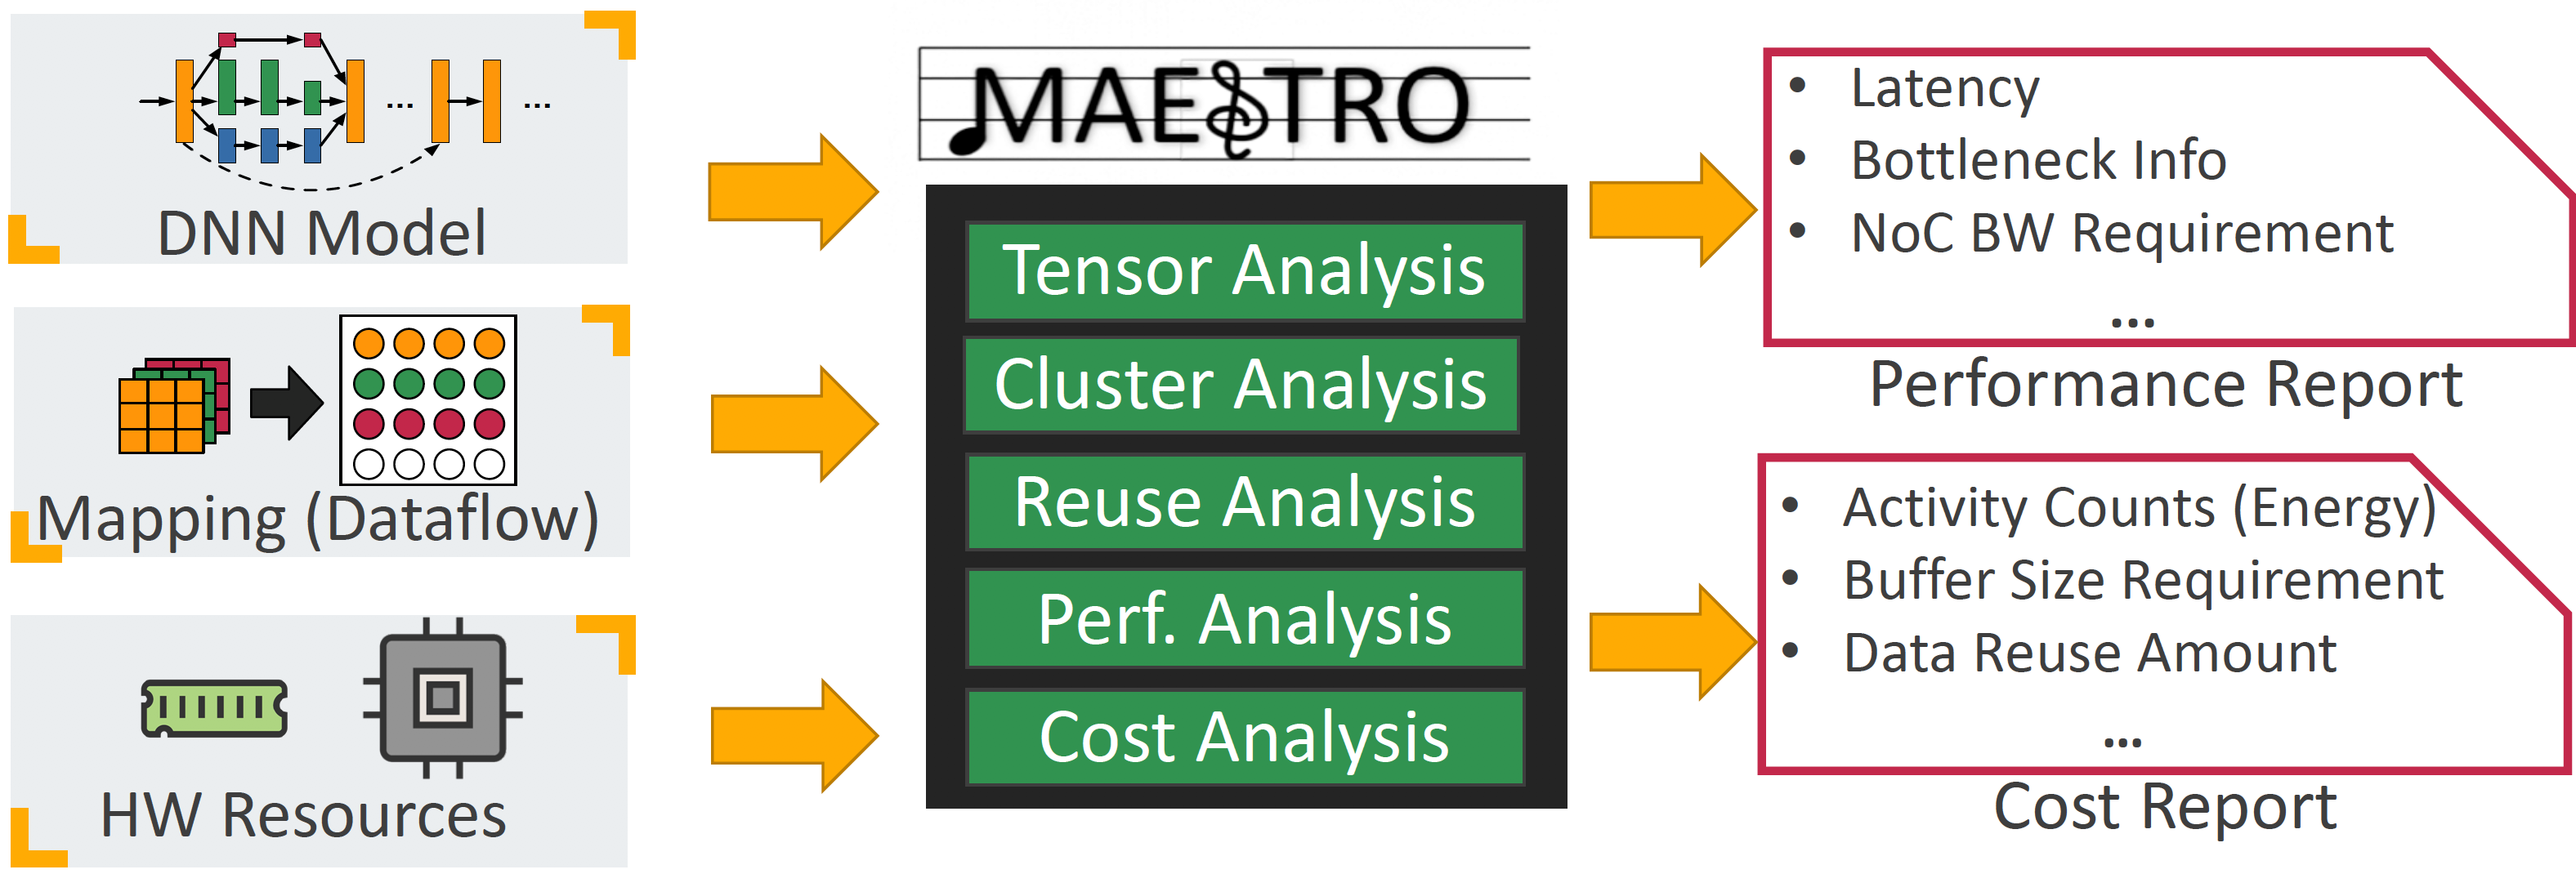 ../_images/maestro_overview.png